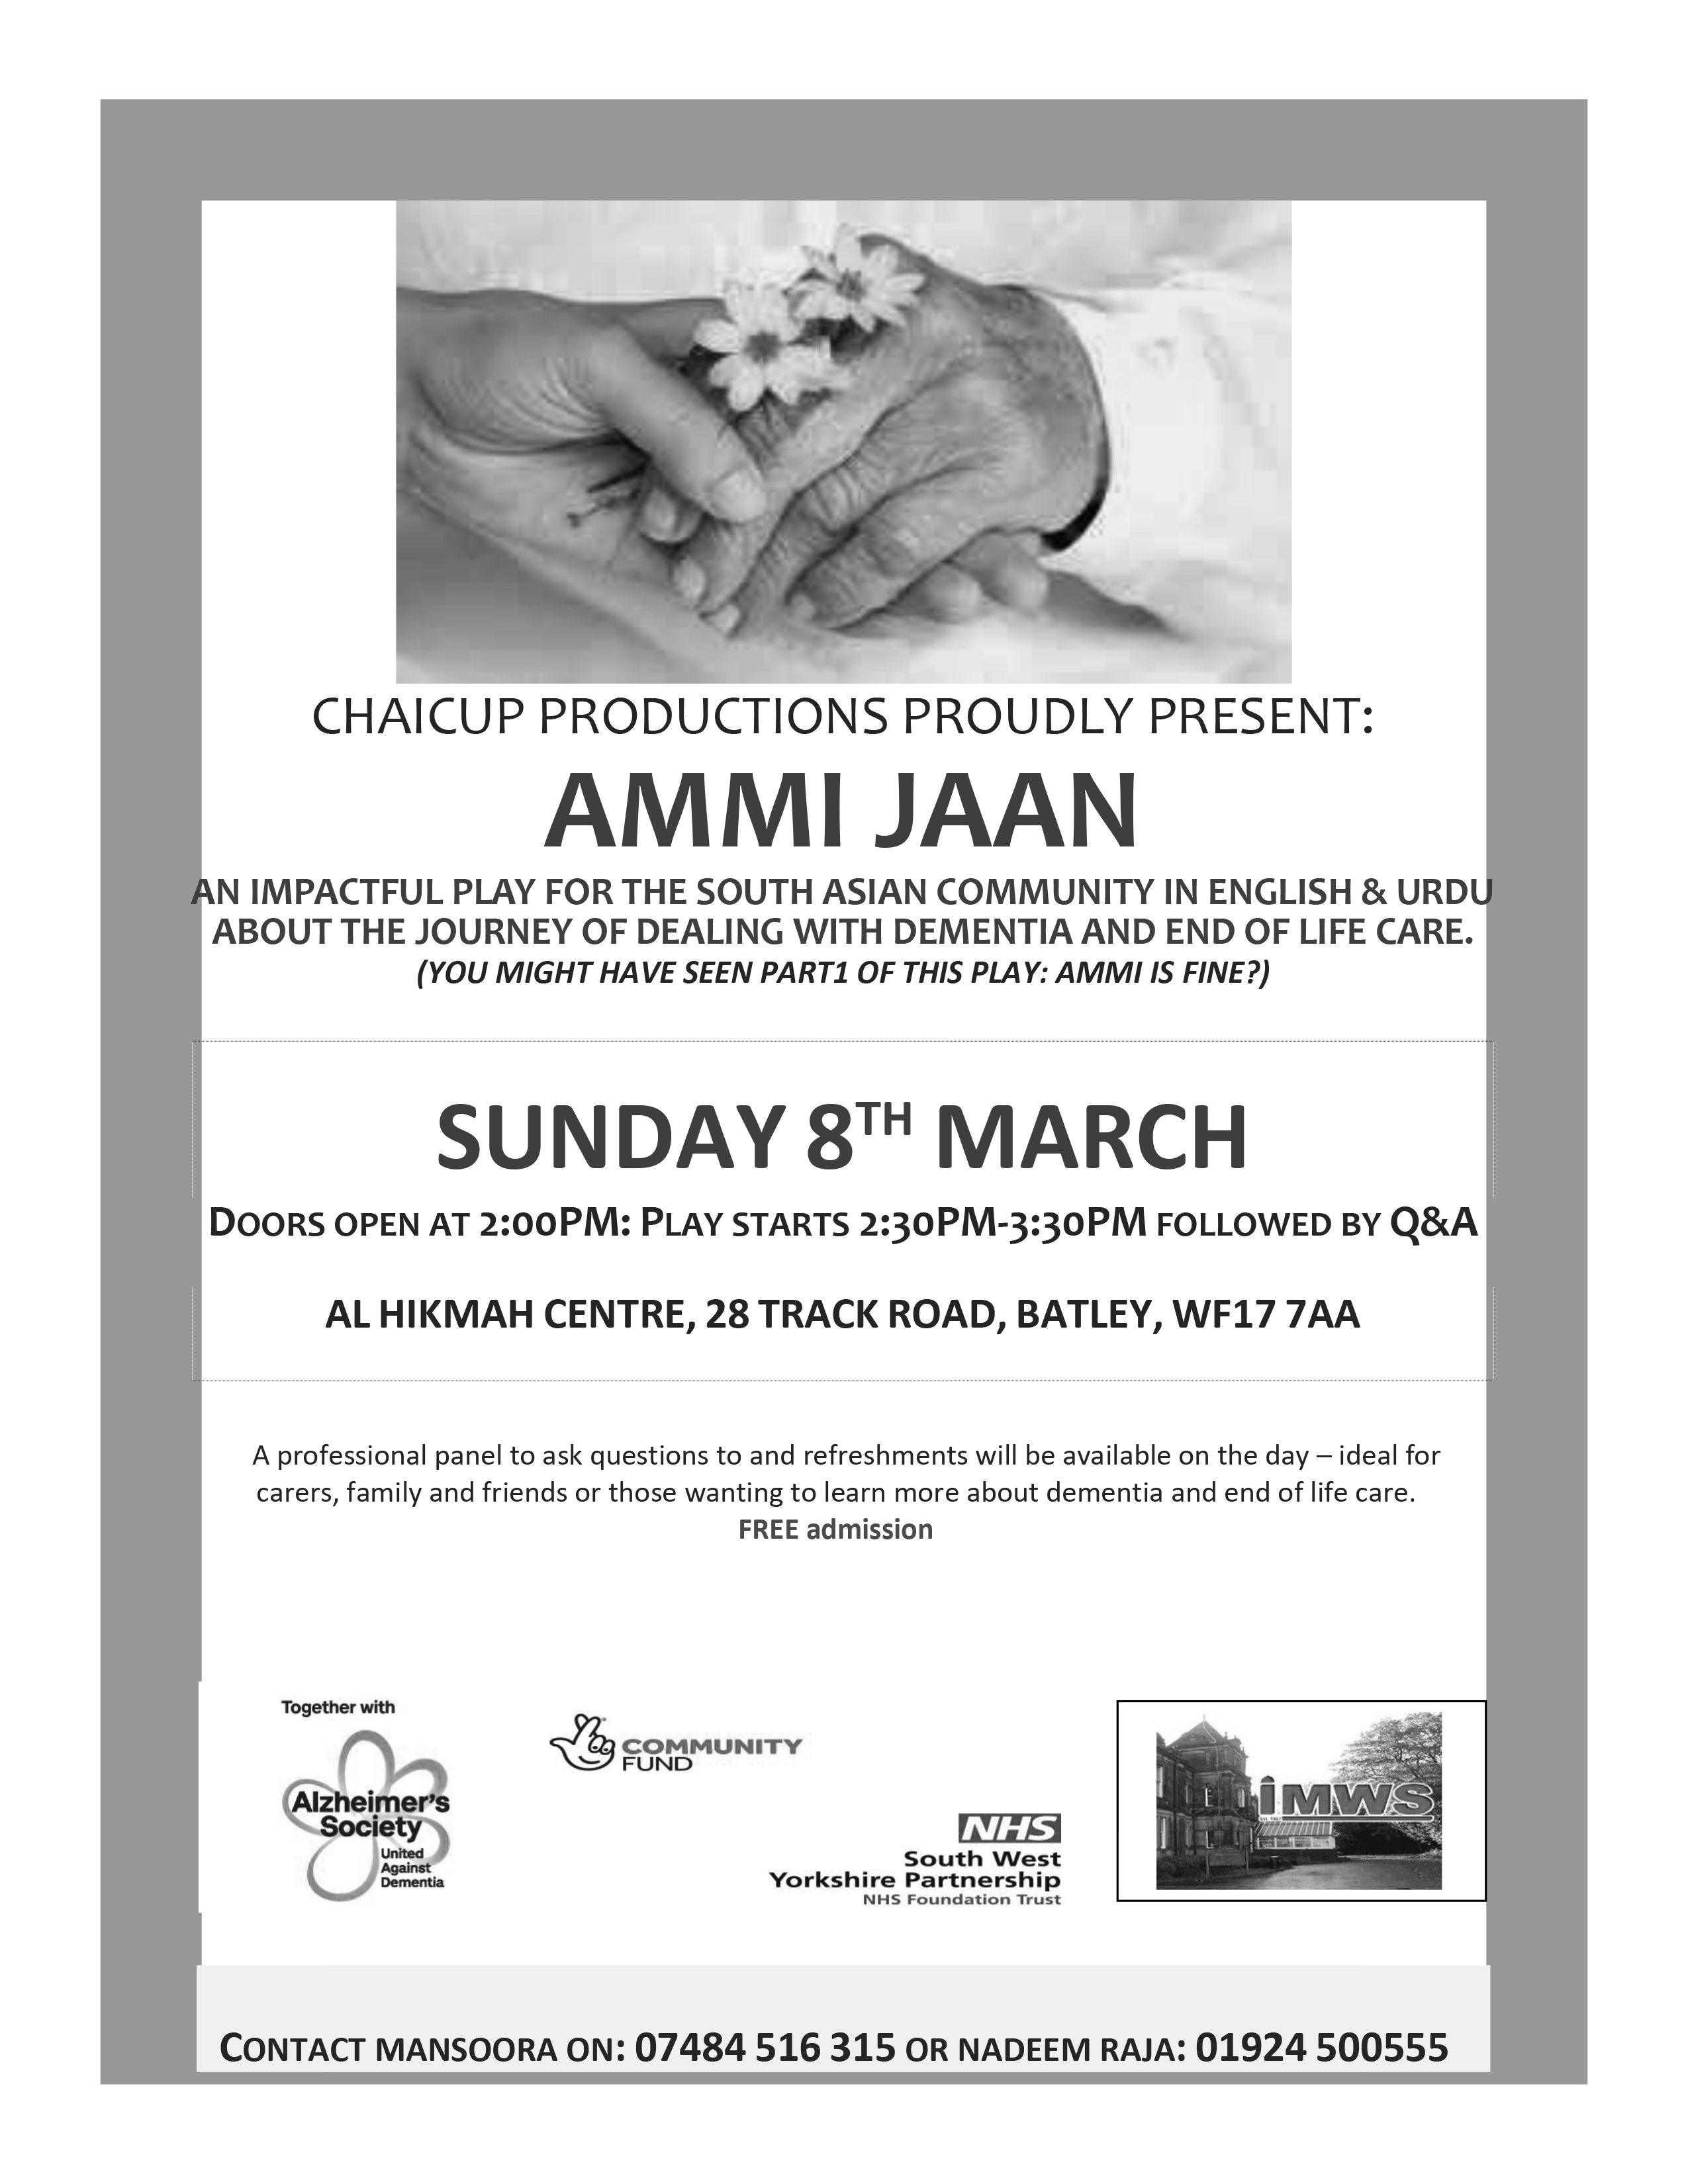 CHAICUP PRODUCTIONS PROUDLY PRESENT: AMMI JAAN